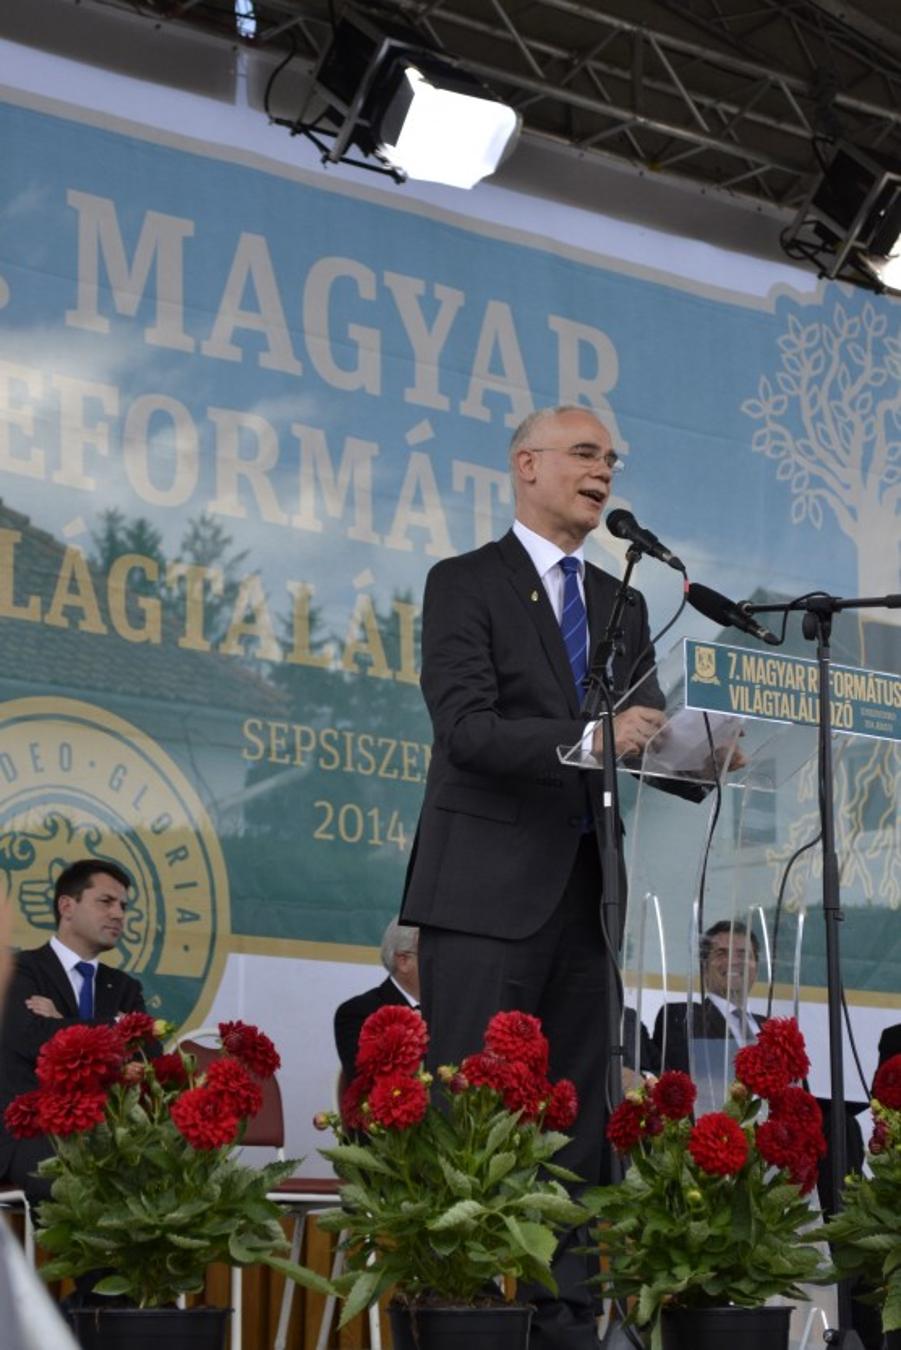 Hungarian Reformed World Summit Opens In Transylvania